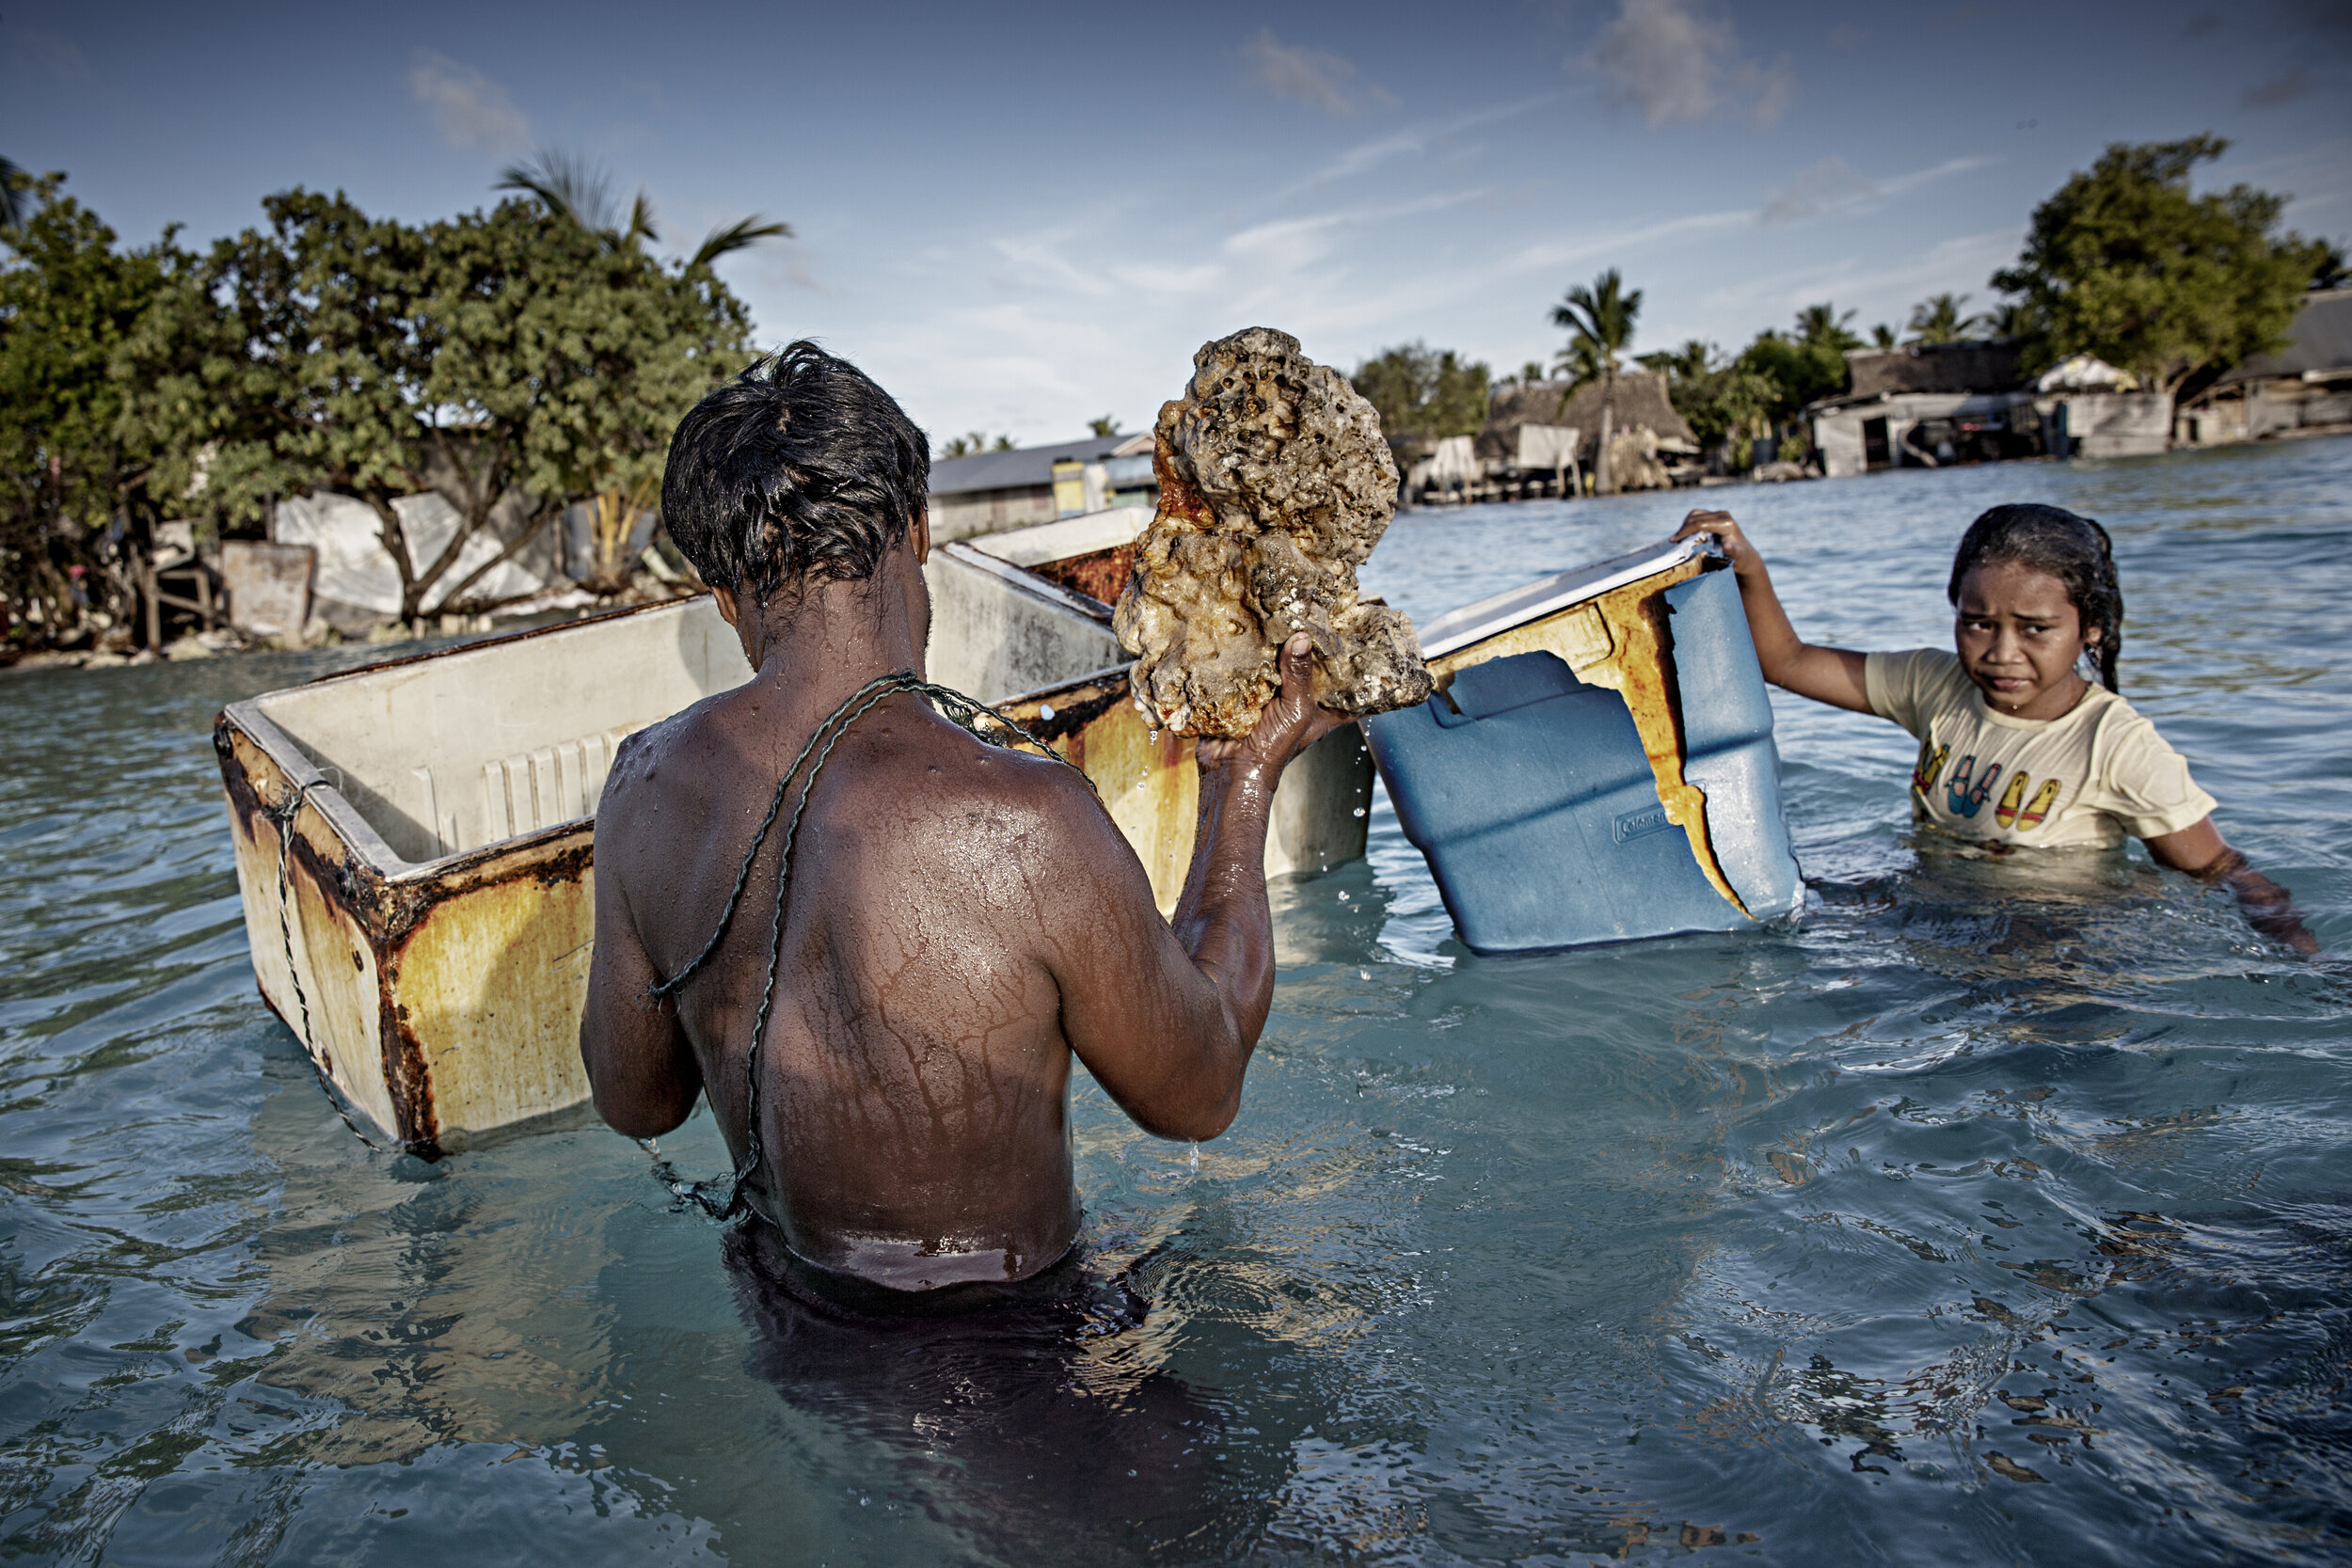  Family members gather rocks and corals from the seabed to build a wall as protection against rising sea levels / Kiribati- 2015 